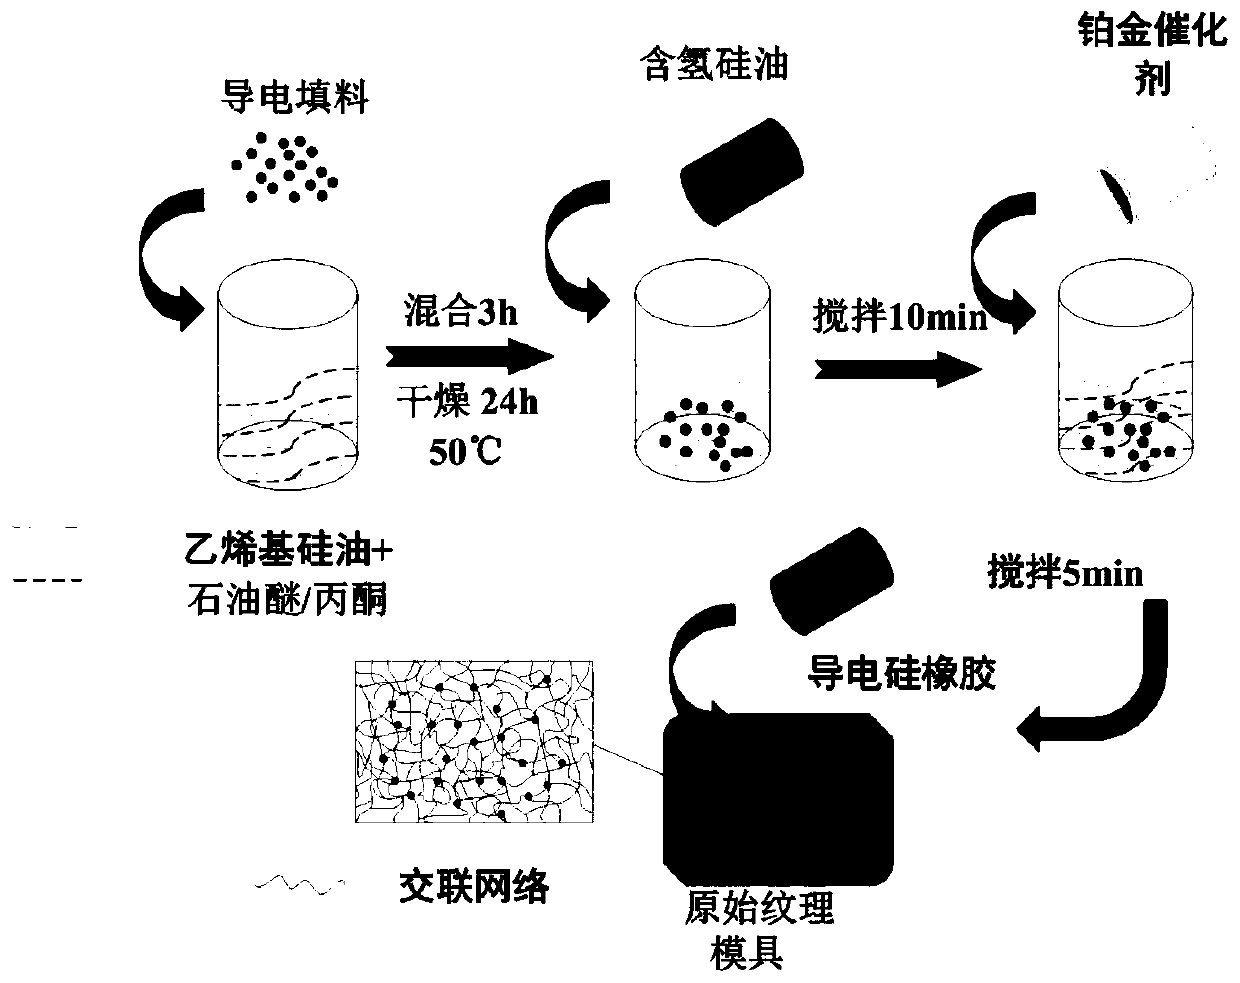 Direct-electrodeposition conductive silicone rubber material